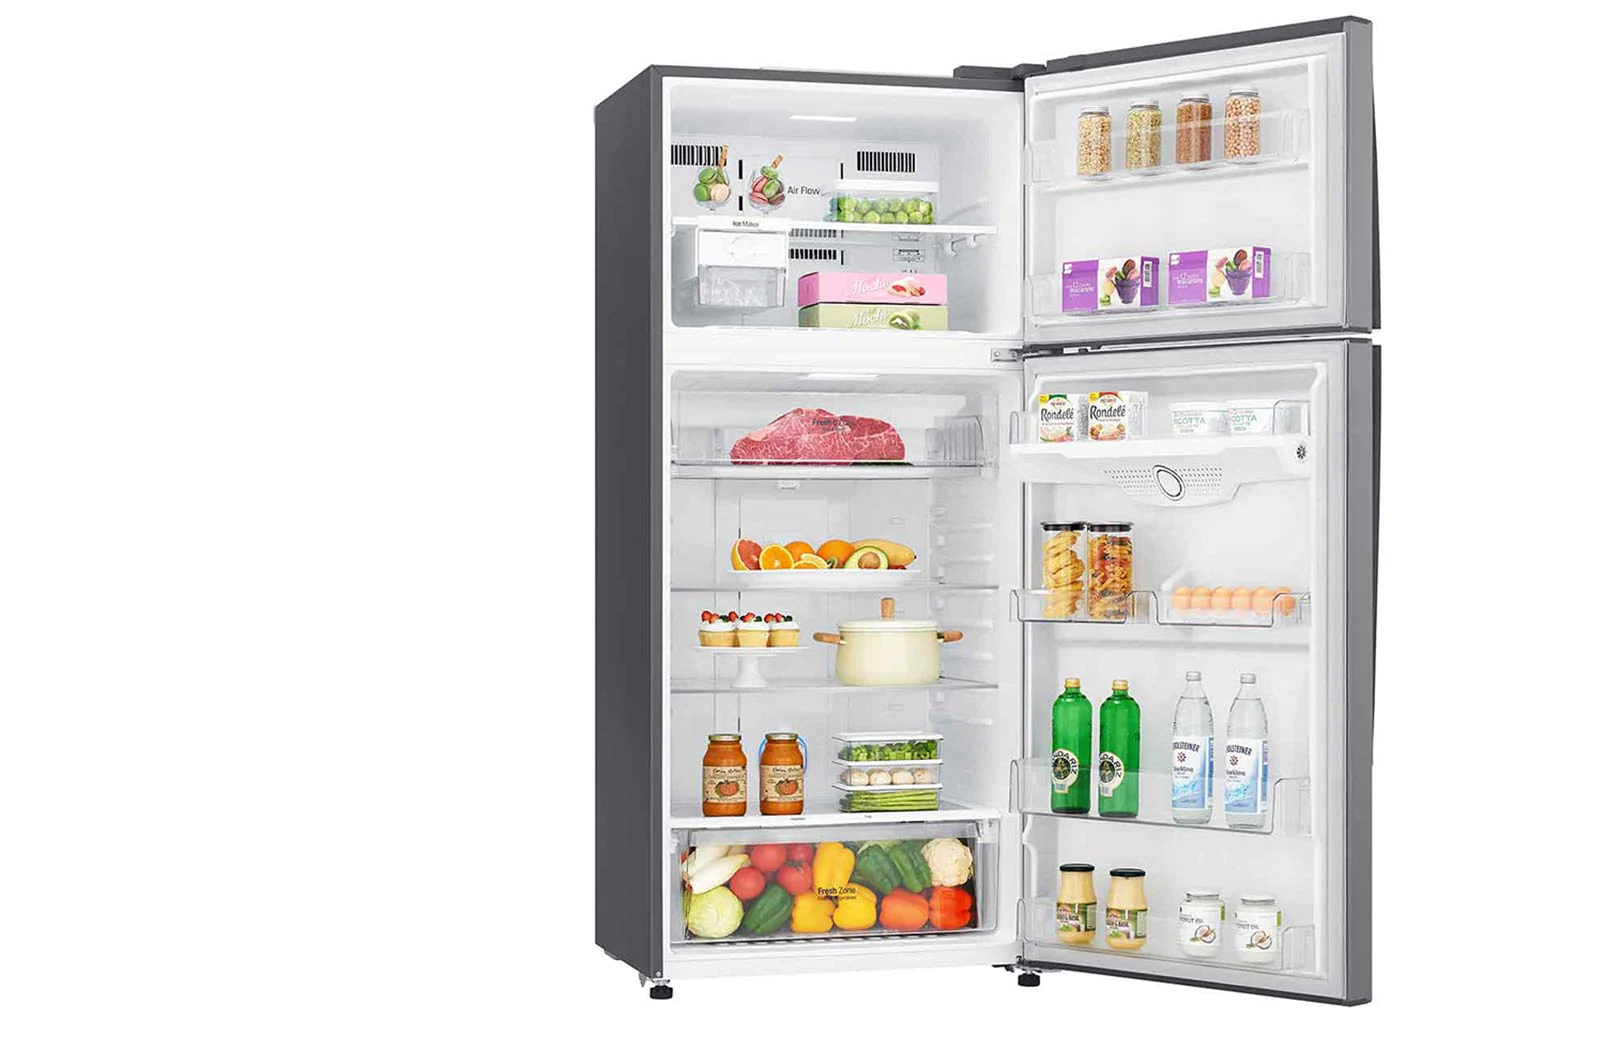 LG 547L Refrigerator With DoorCooling+™ Technology - Silver